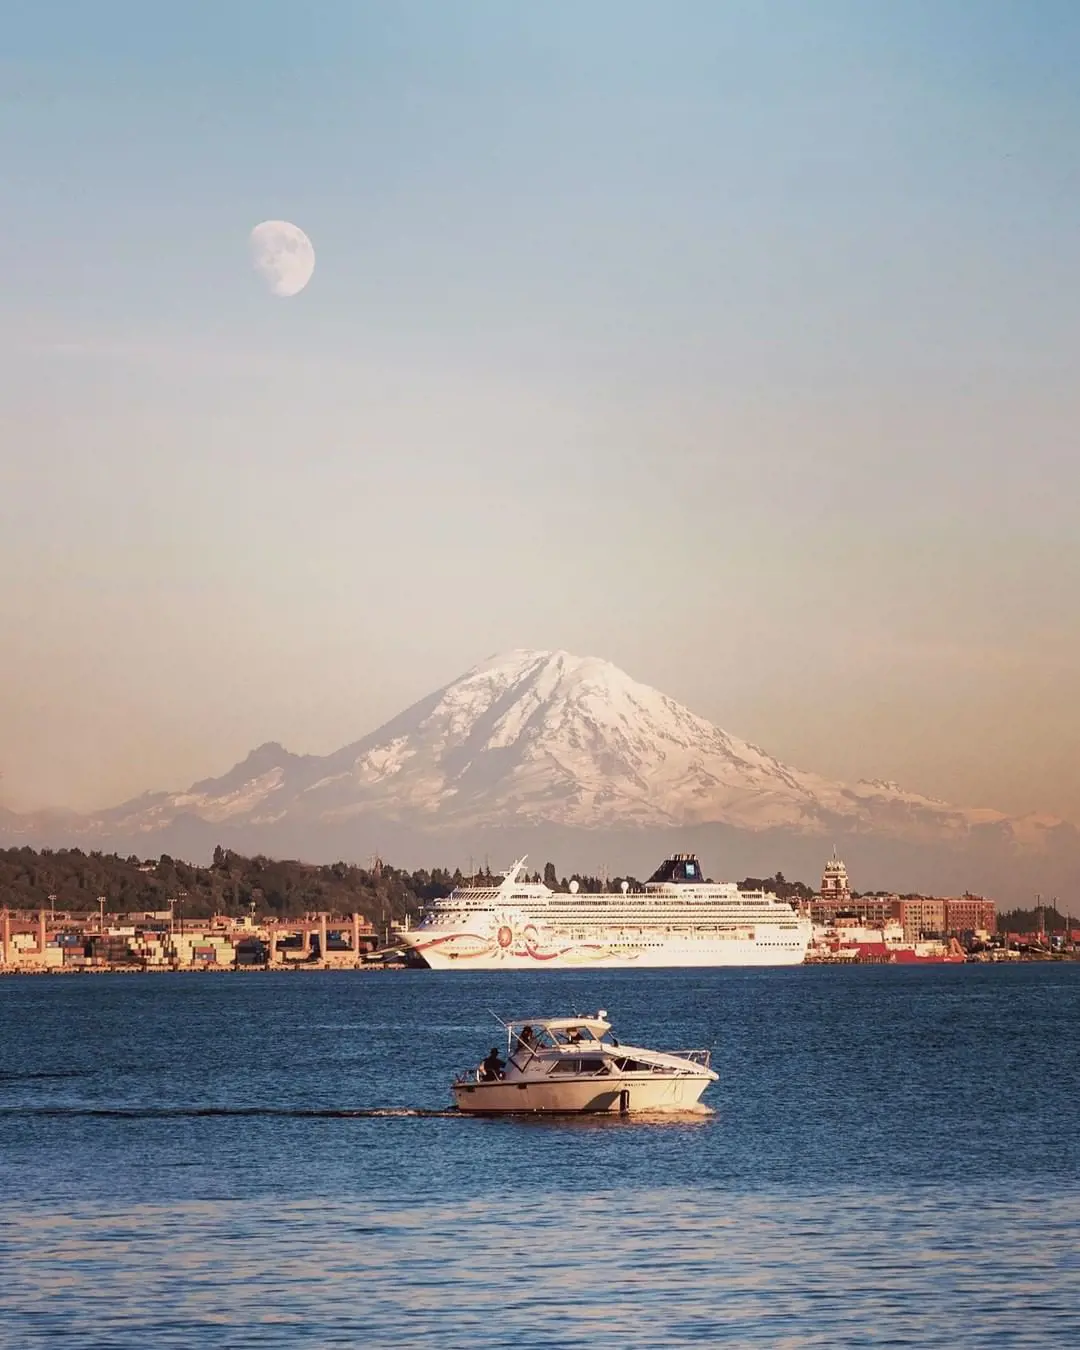 Iconic view of Mount Rainer in Seattle's landscape.